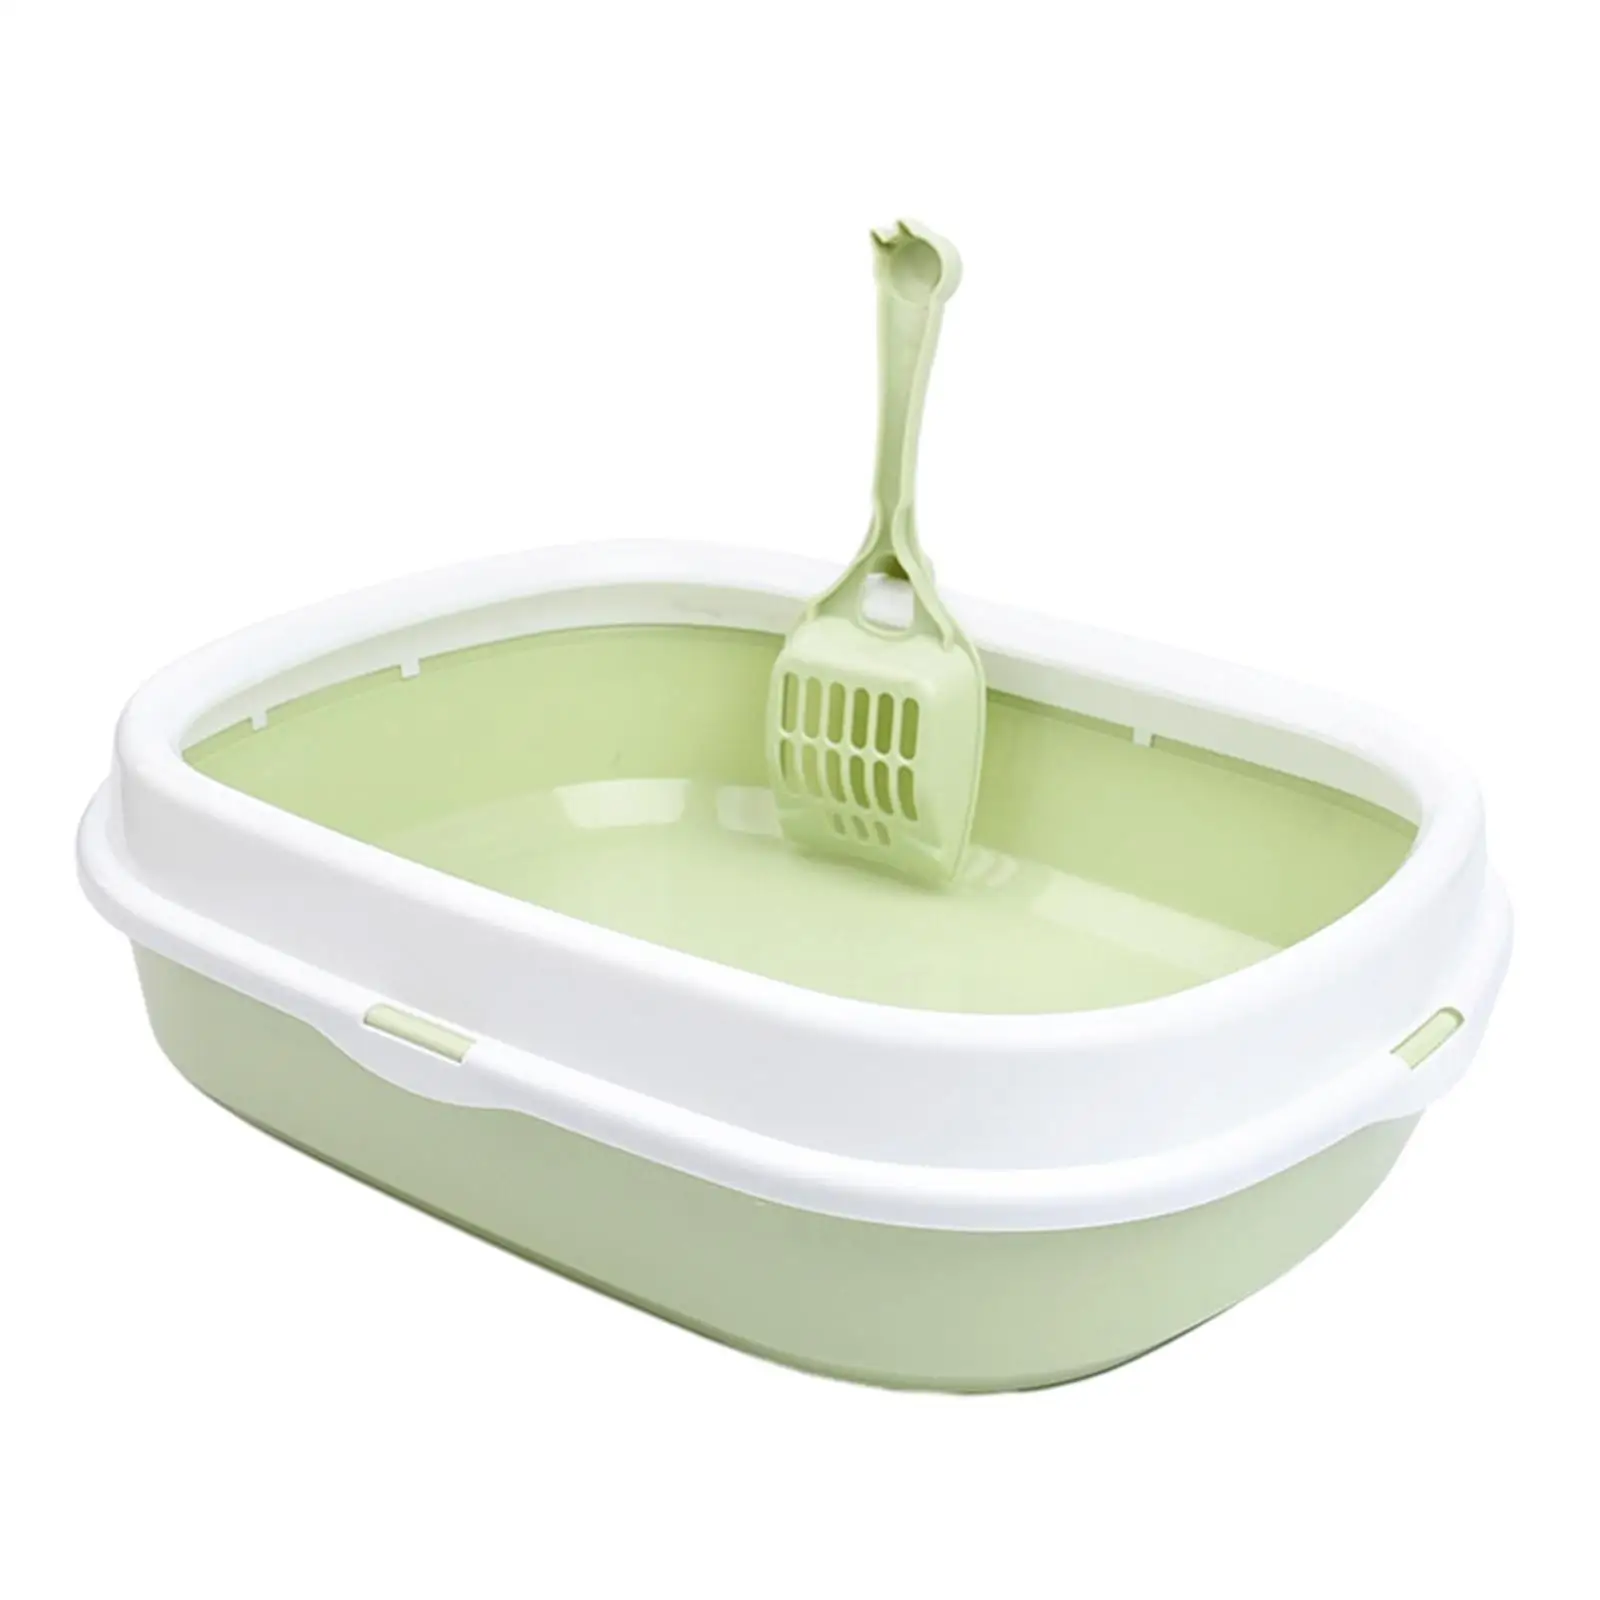 Cat Litter Box, Cat Bedpan Portable with Scoop, High Sides Cat Litter Container,